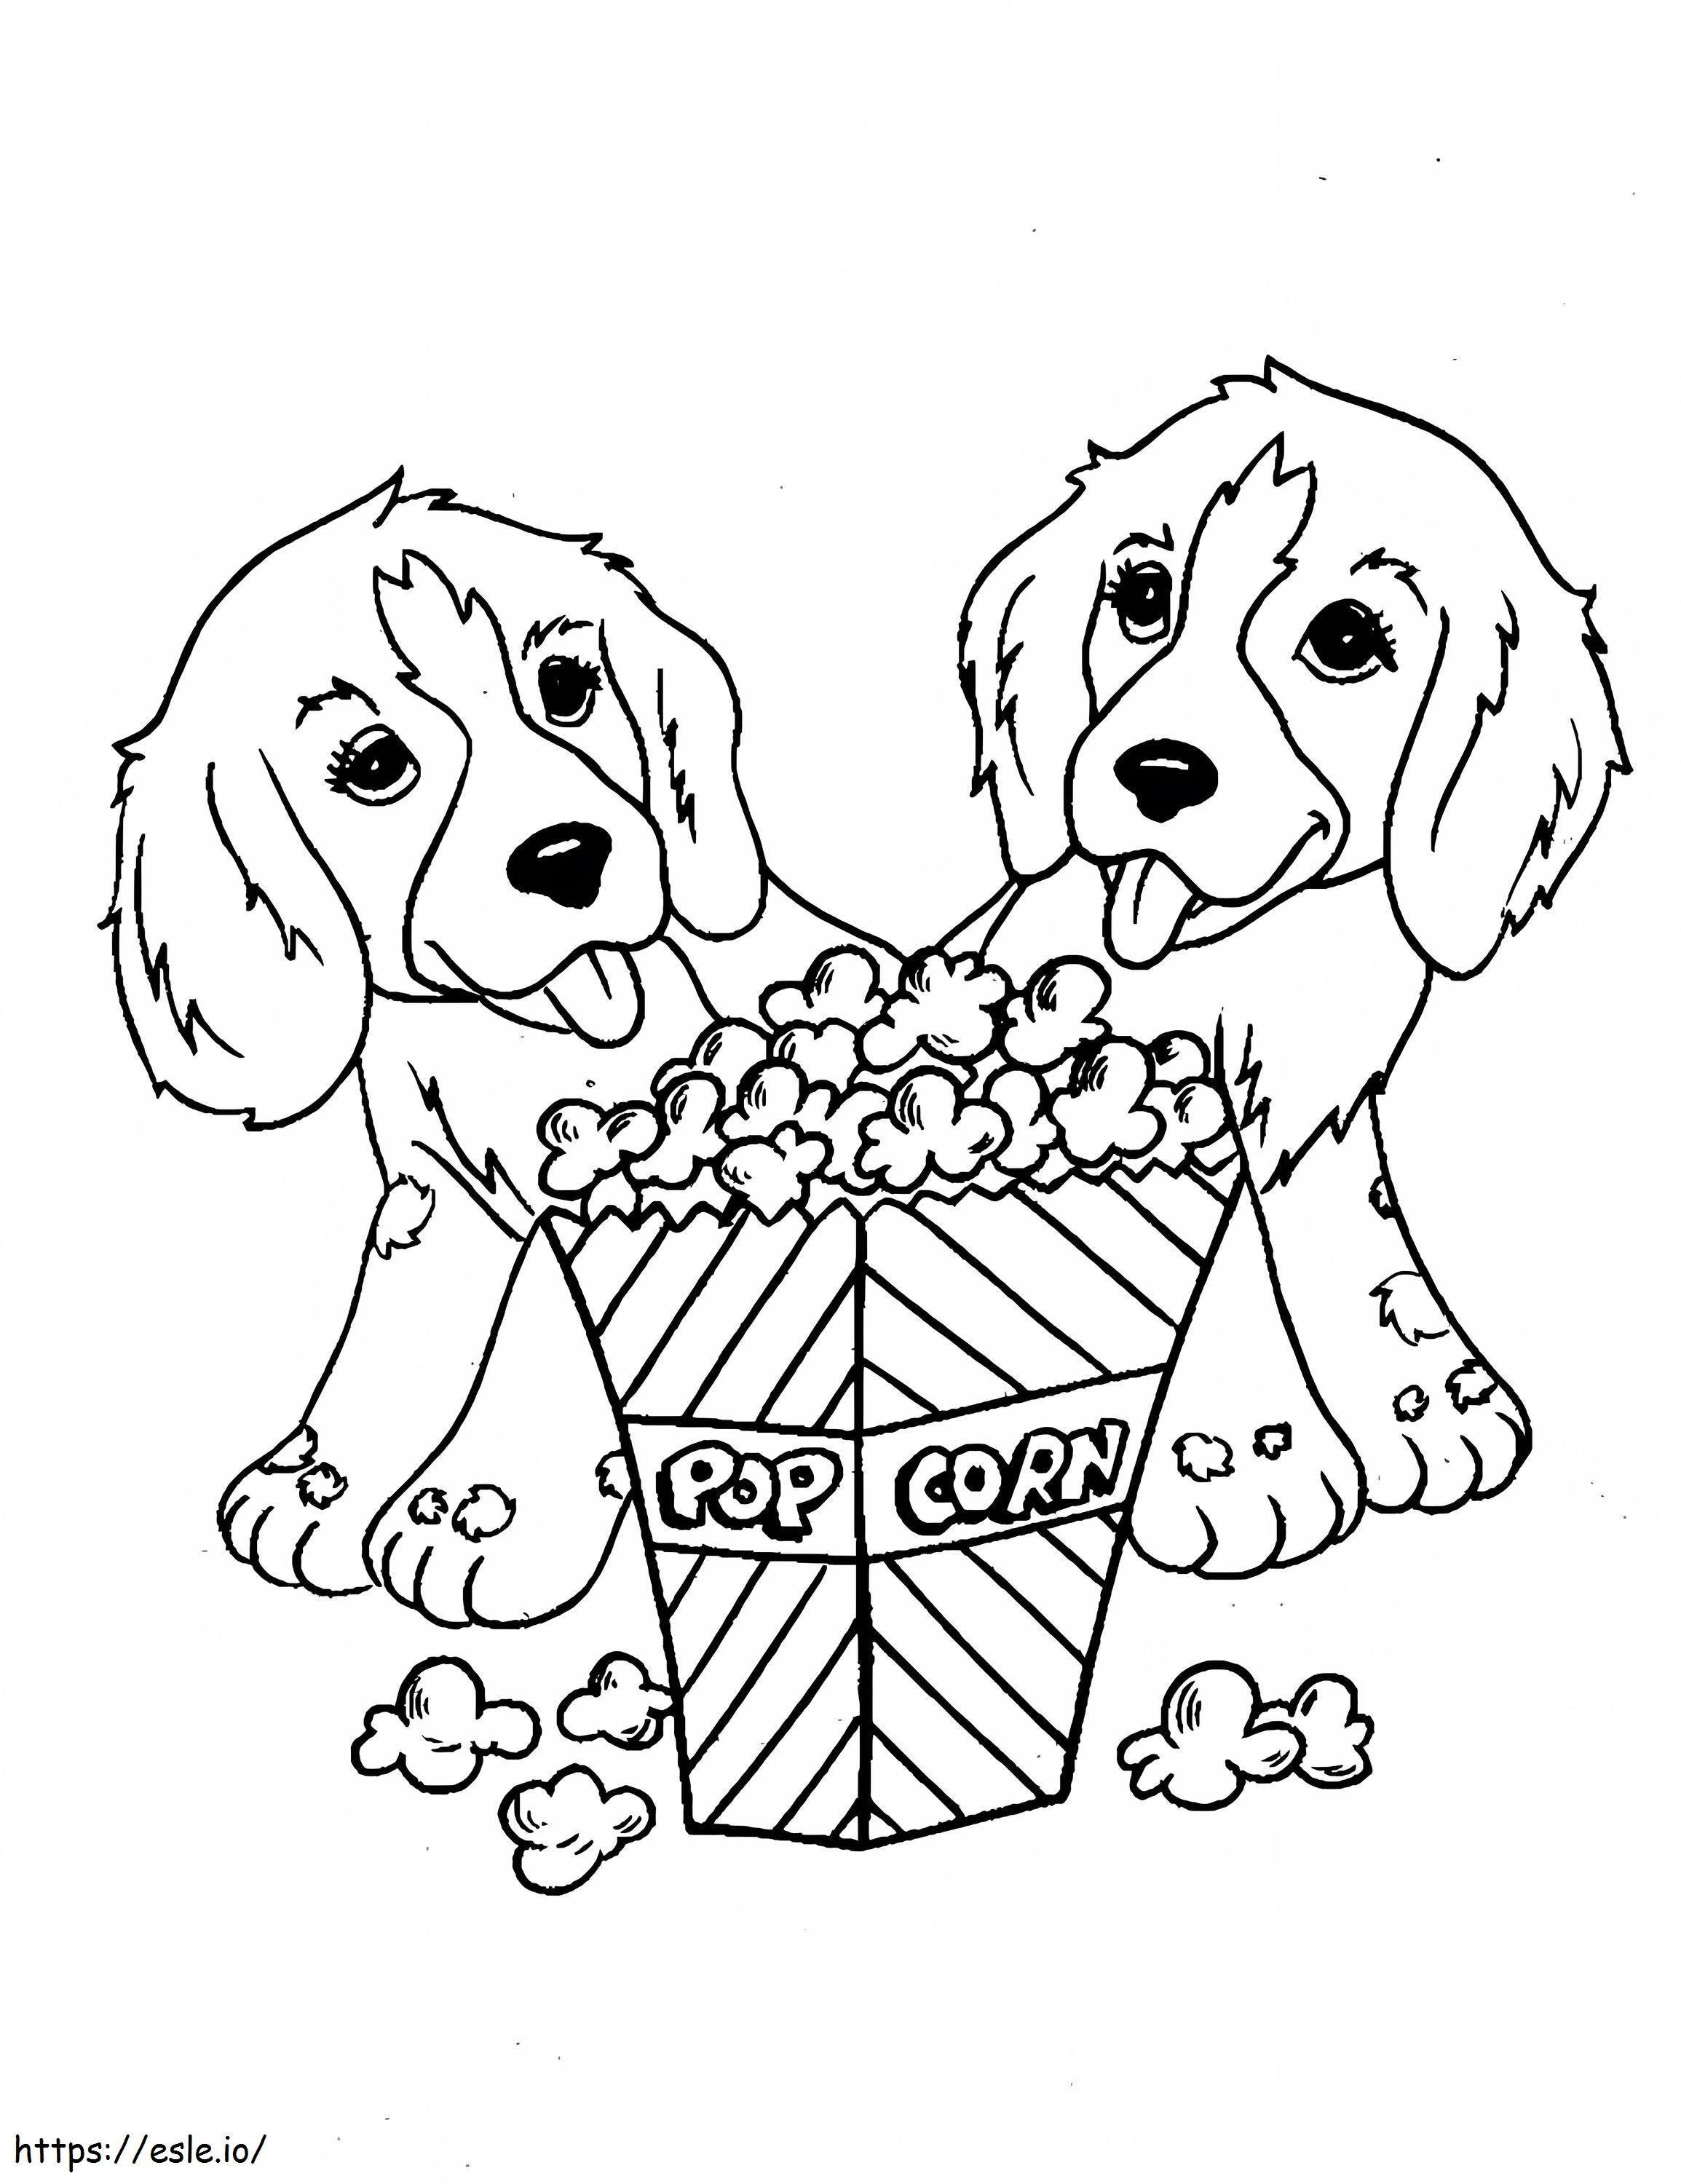 1539418795 Popular Dog Coloring Sheets Free Printable Pages For Kids Adults 4 coloring page